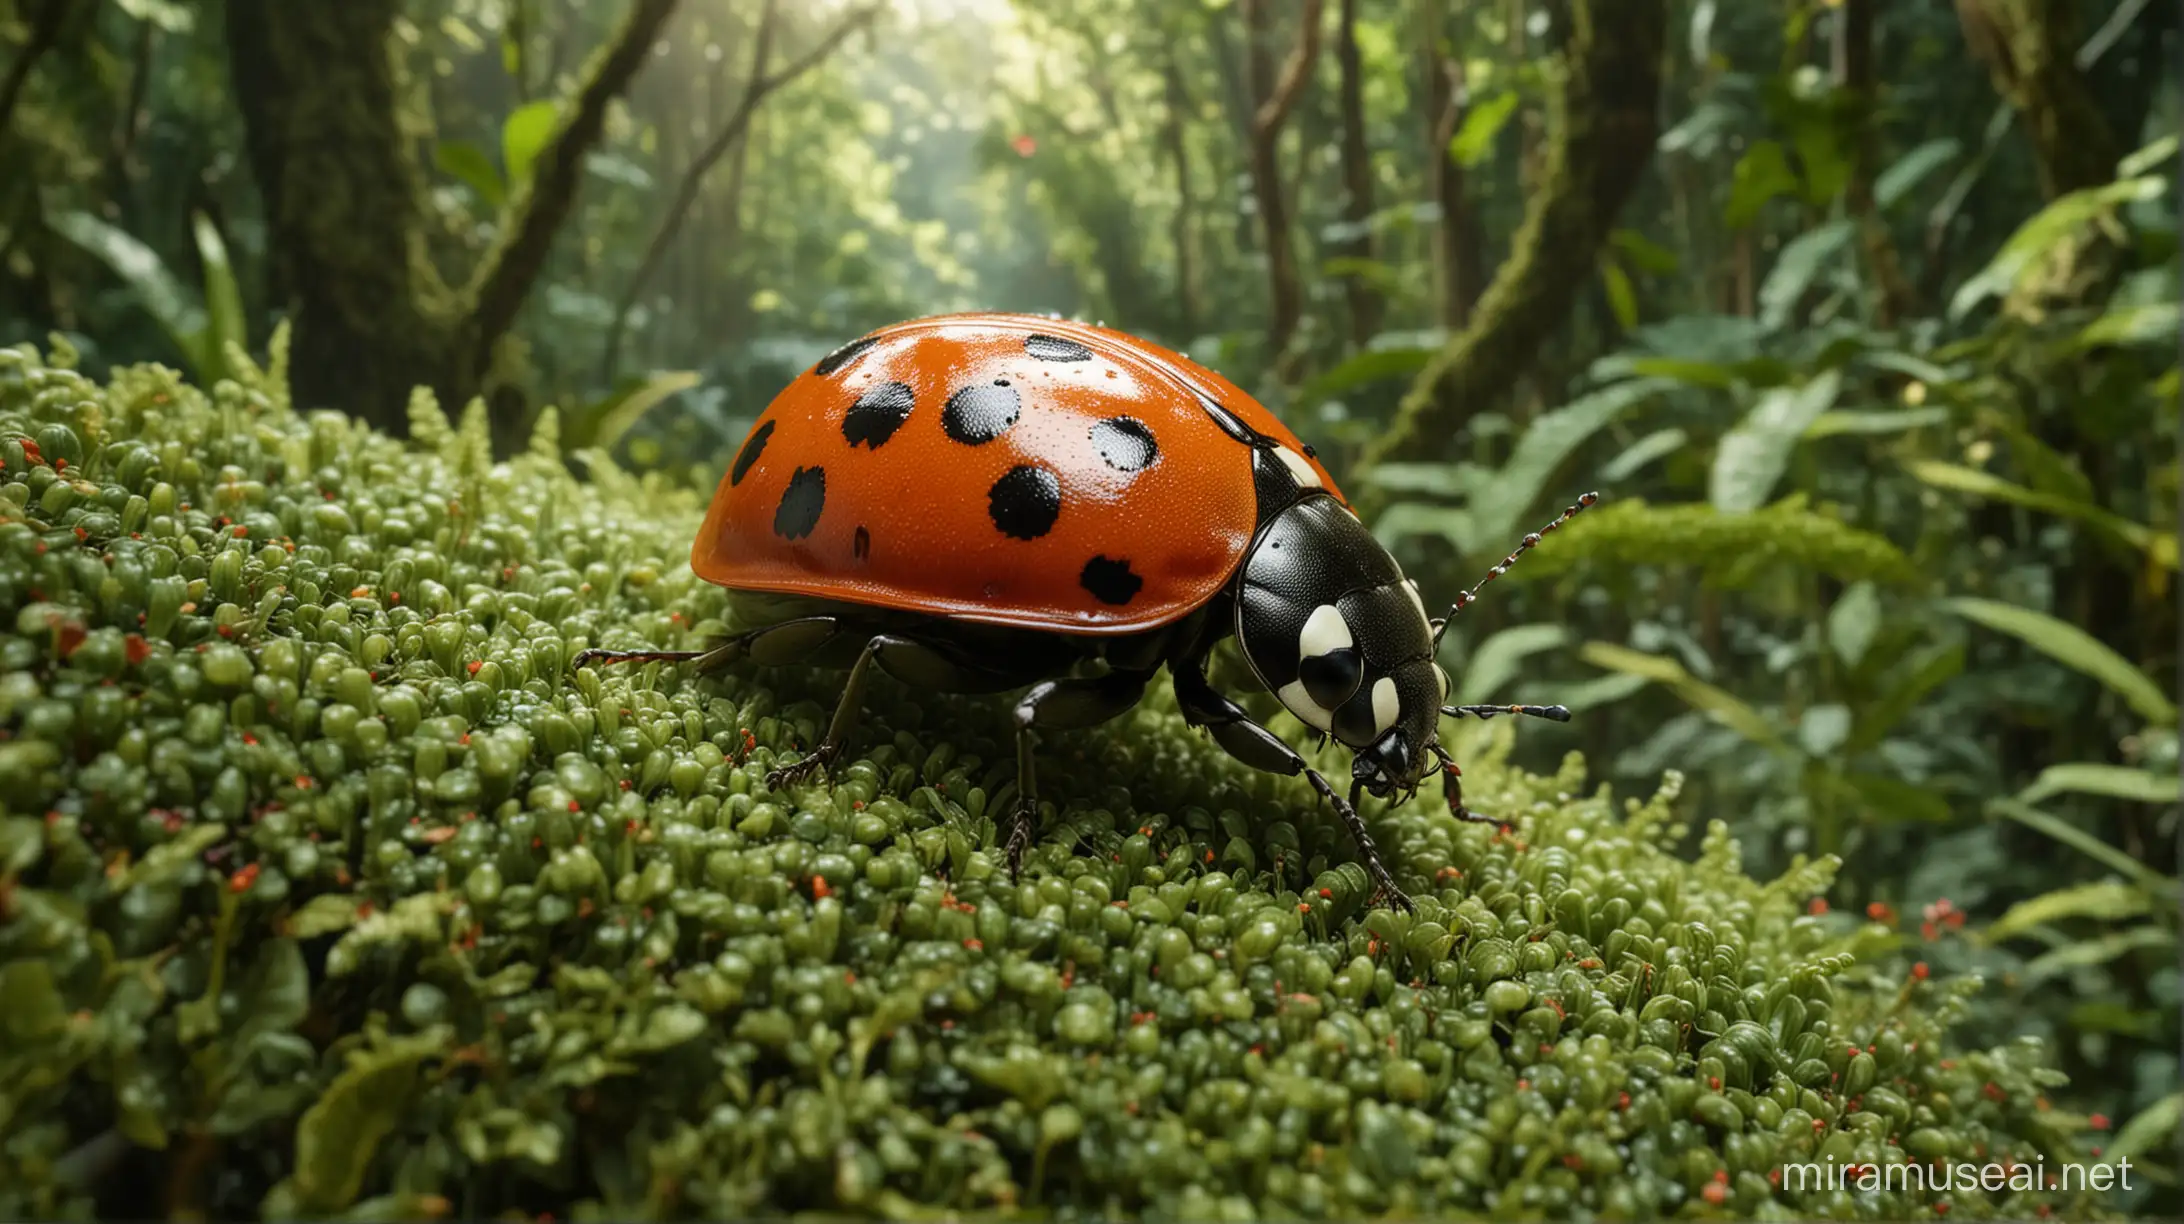 Craft a vibrant, highly detailed 8K close-up image featuring a lively ladybug flaying to the lens of a camera, against the lush backdrop of the Amazon jungle. Immerse viewers in the vivid colors of the ladybug's red and black spots, making it the central focus. The background should be a softly blurred, yet artistically rendered tapestry of greens and browns, characteristic of the dense Amazonian foliage. This composition aims to evoke intimacy and immediacy, inviting viewers into the enchanting microcosm of this captivating insect.